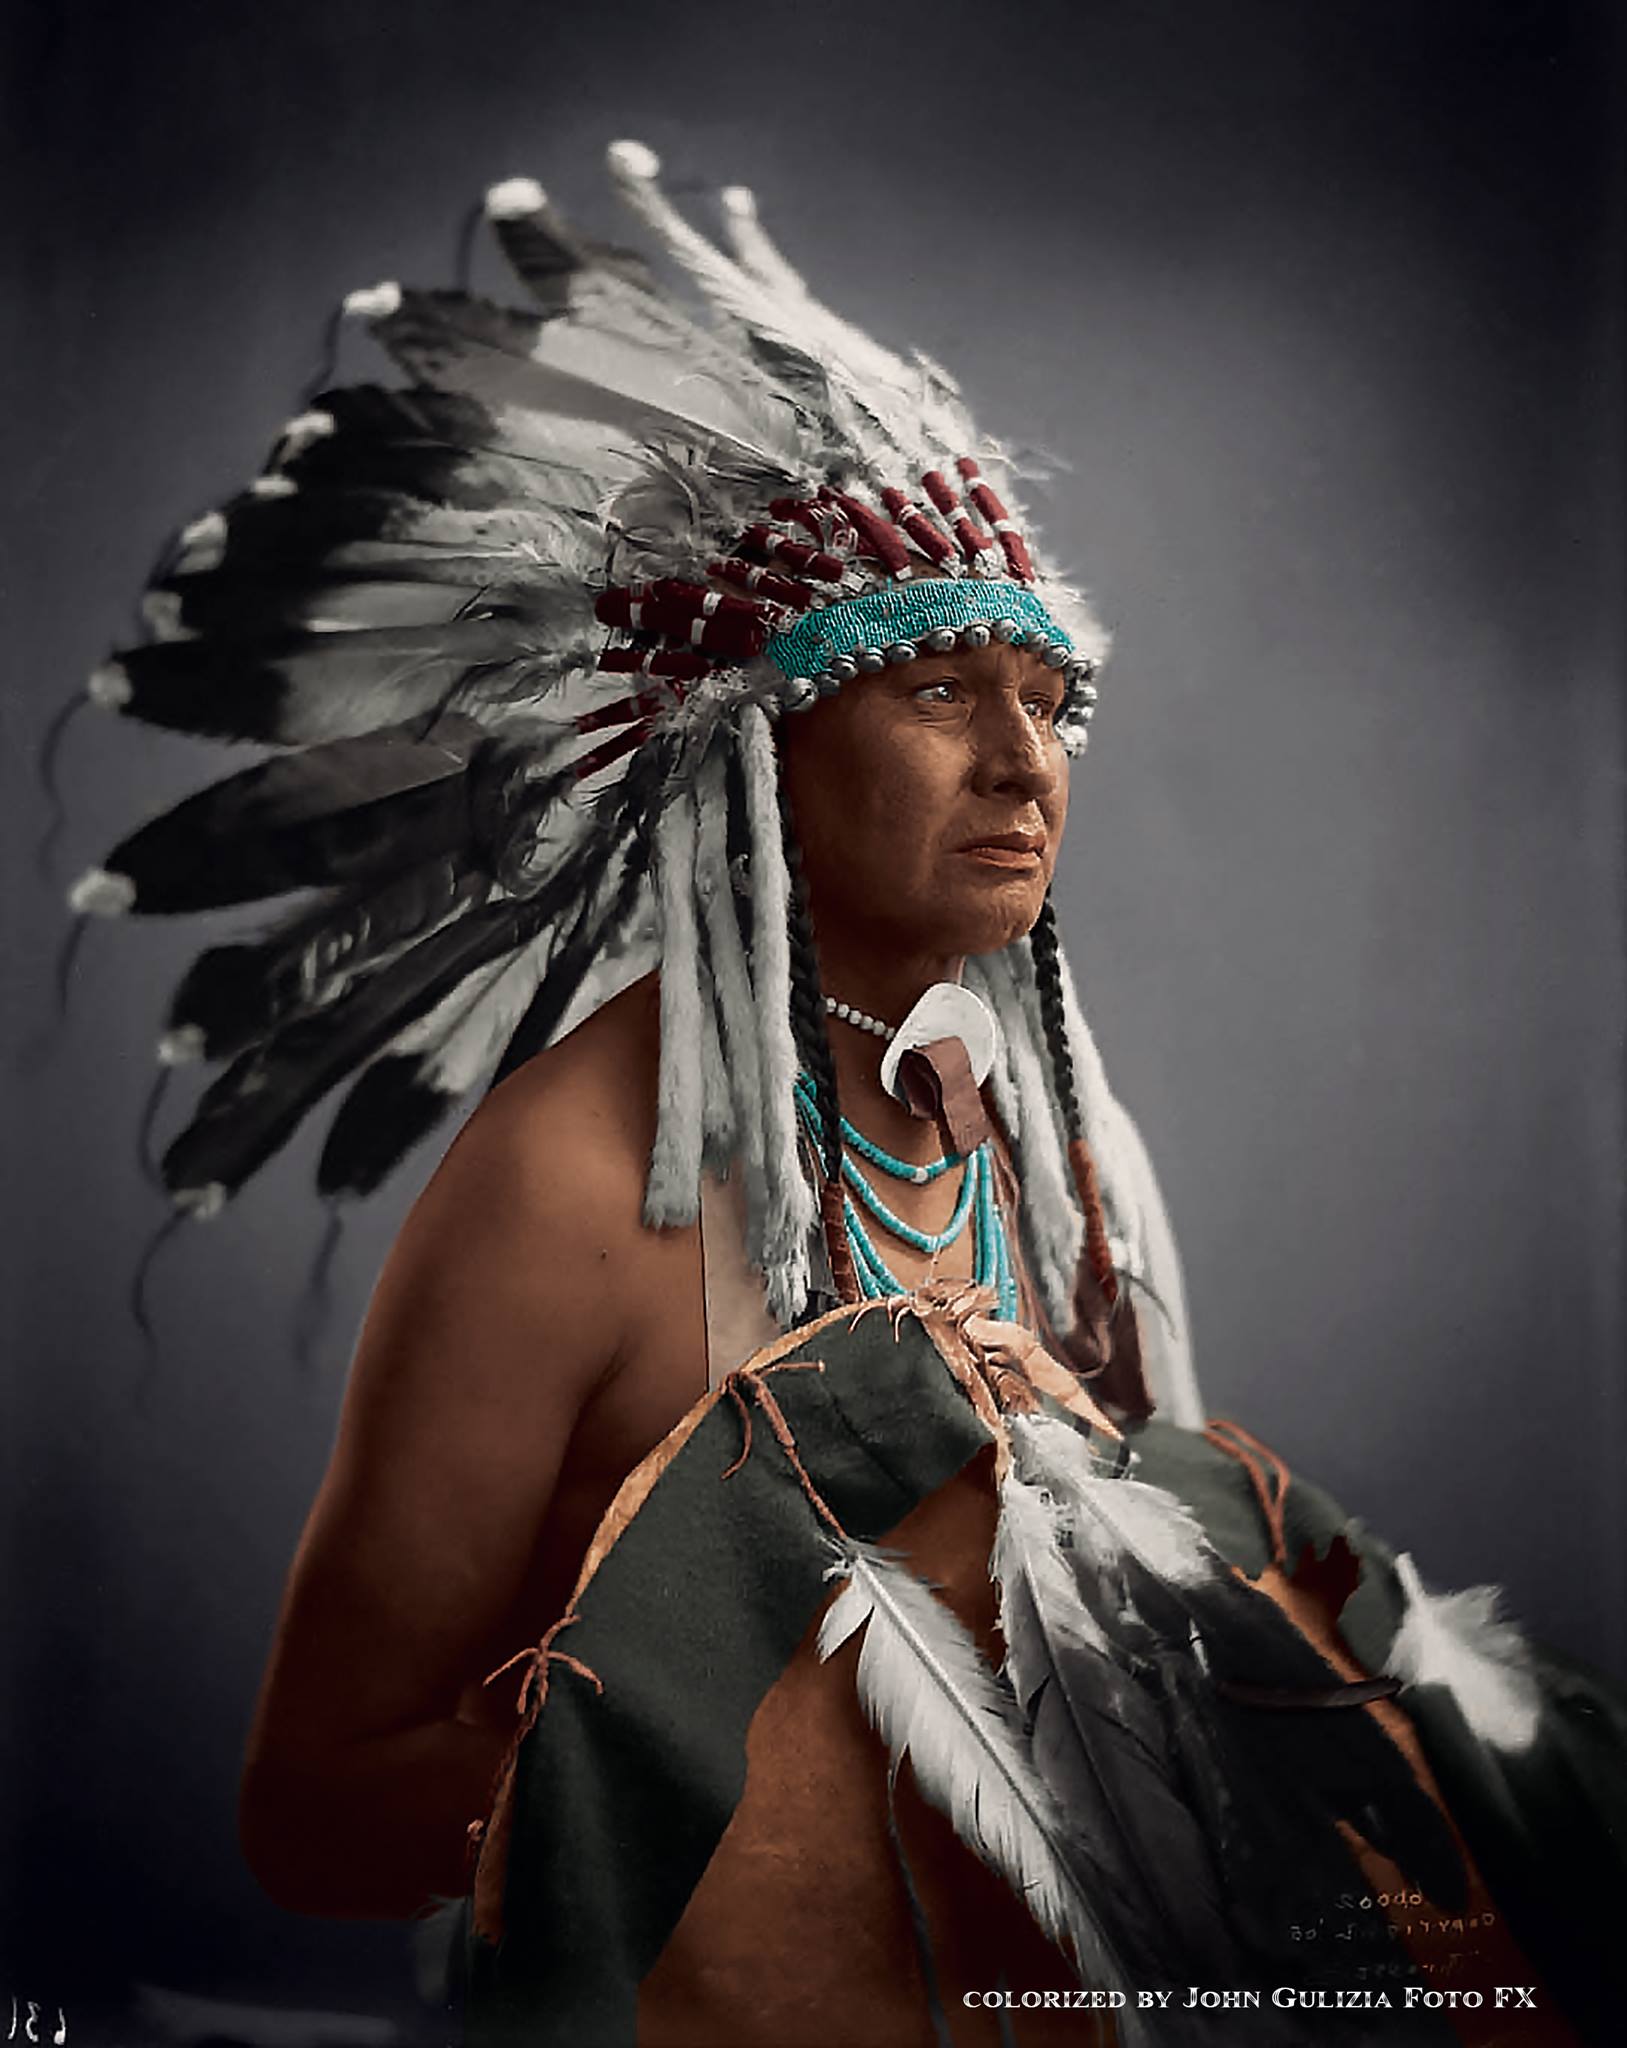 Rare Colorized Native American Images From The Past-7823